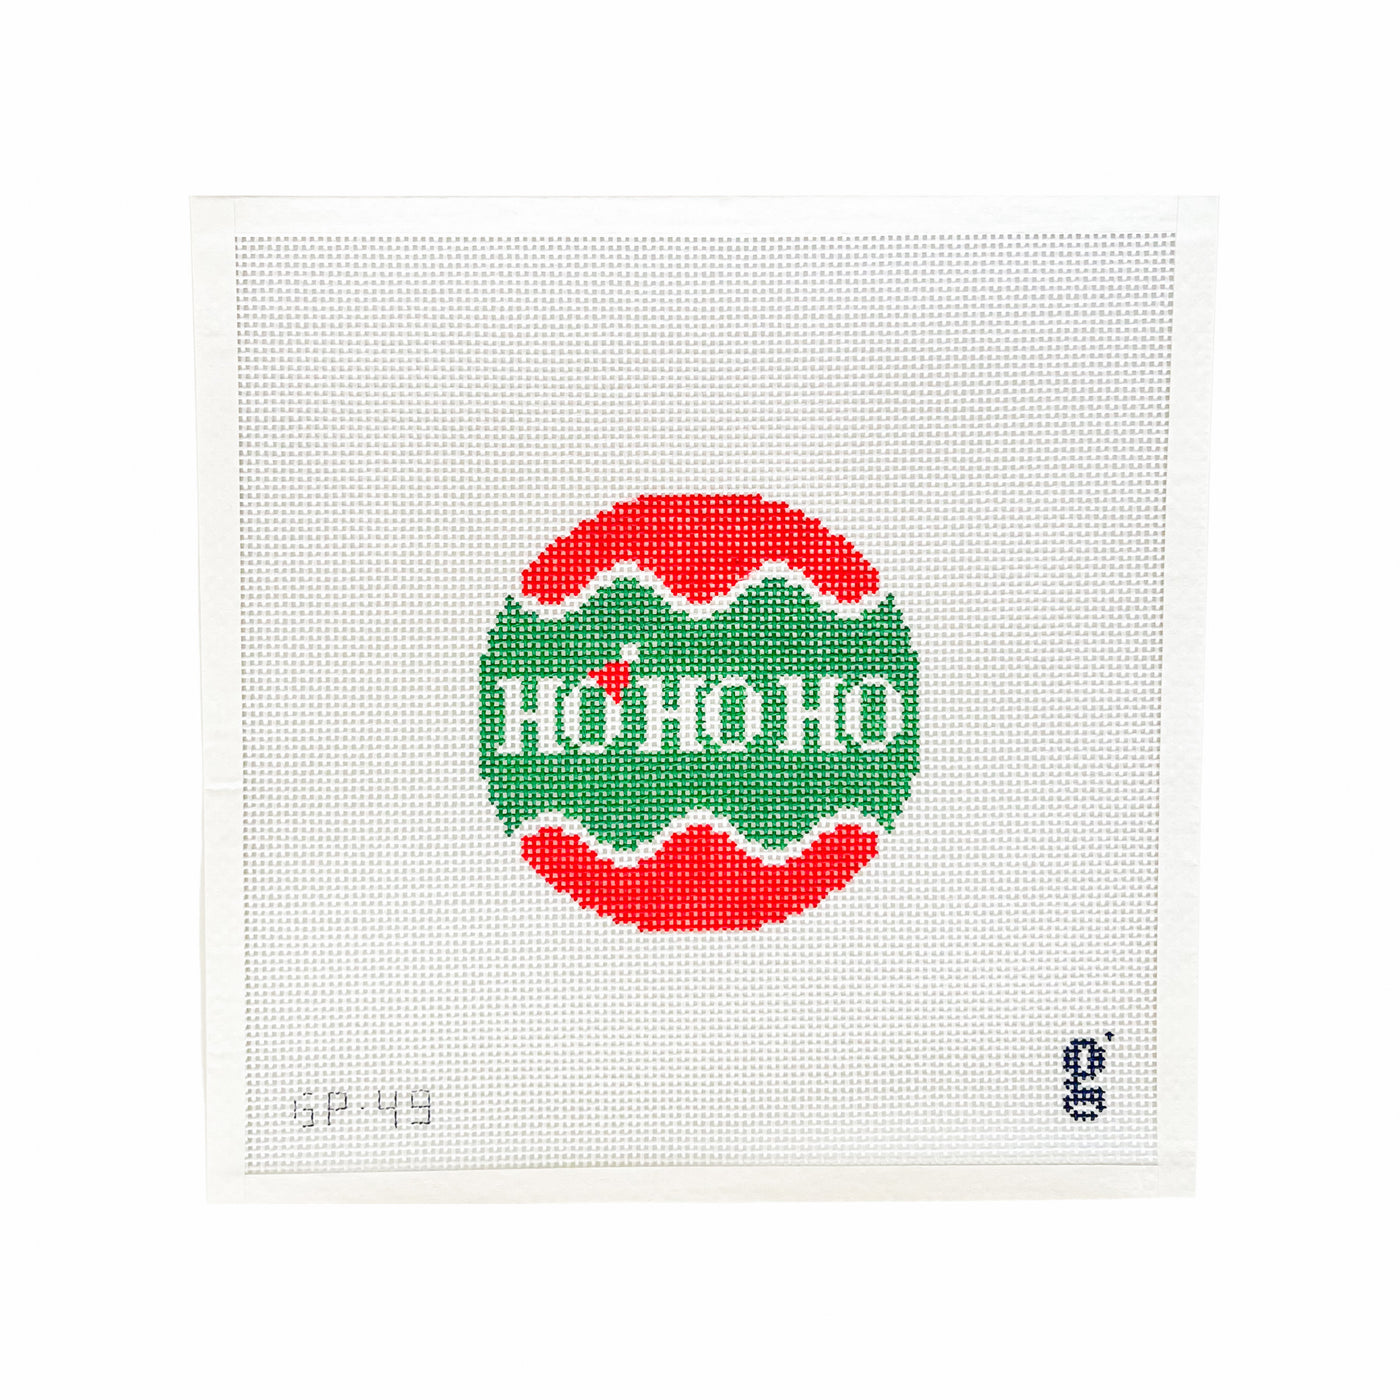 White square shaped needlepoint canvas with a circular green and red design at center. The words "HO HO HO" are at center in white. A red santa hat sits on top of the first "O". 